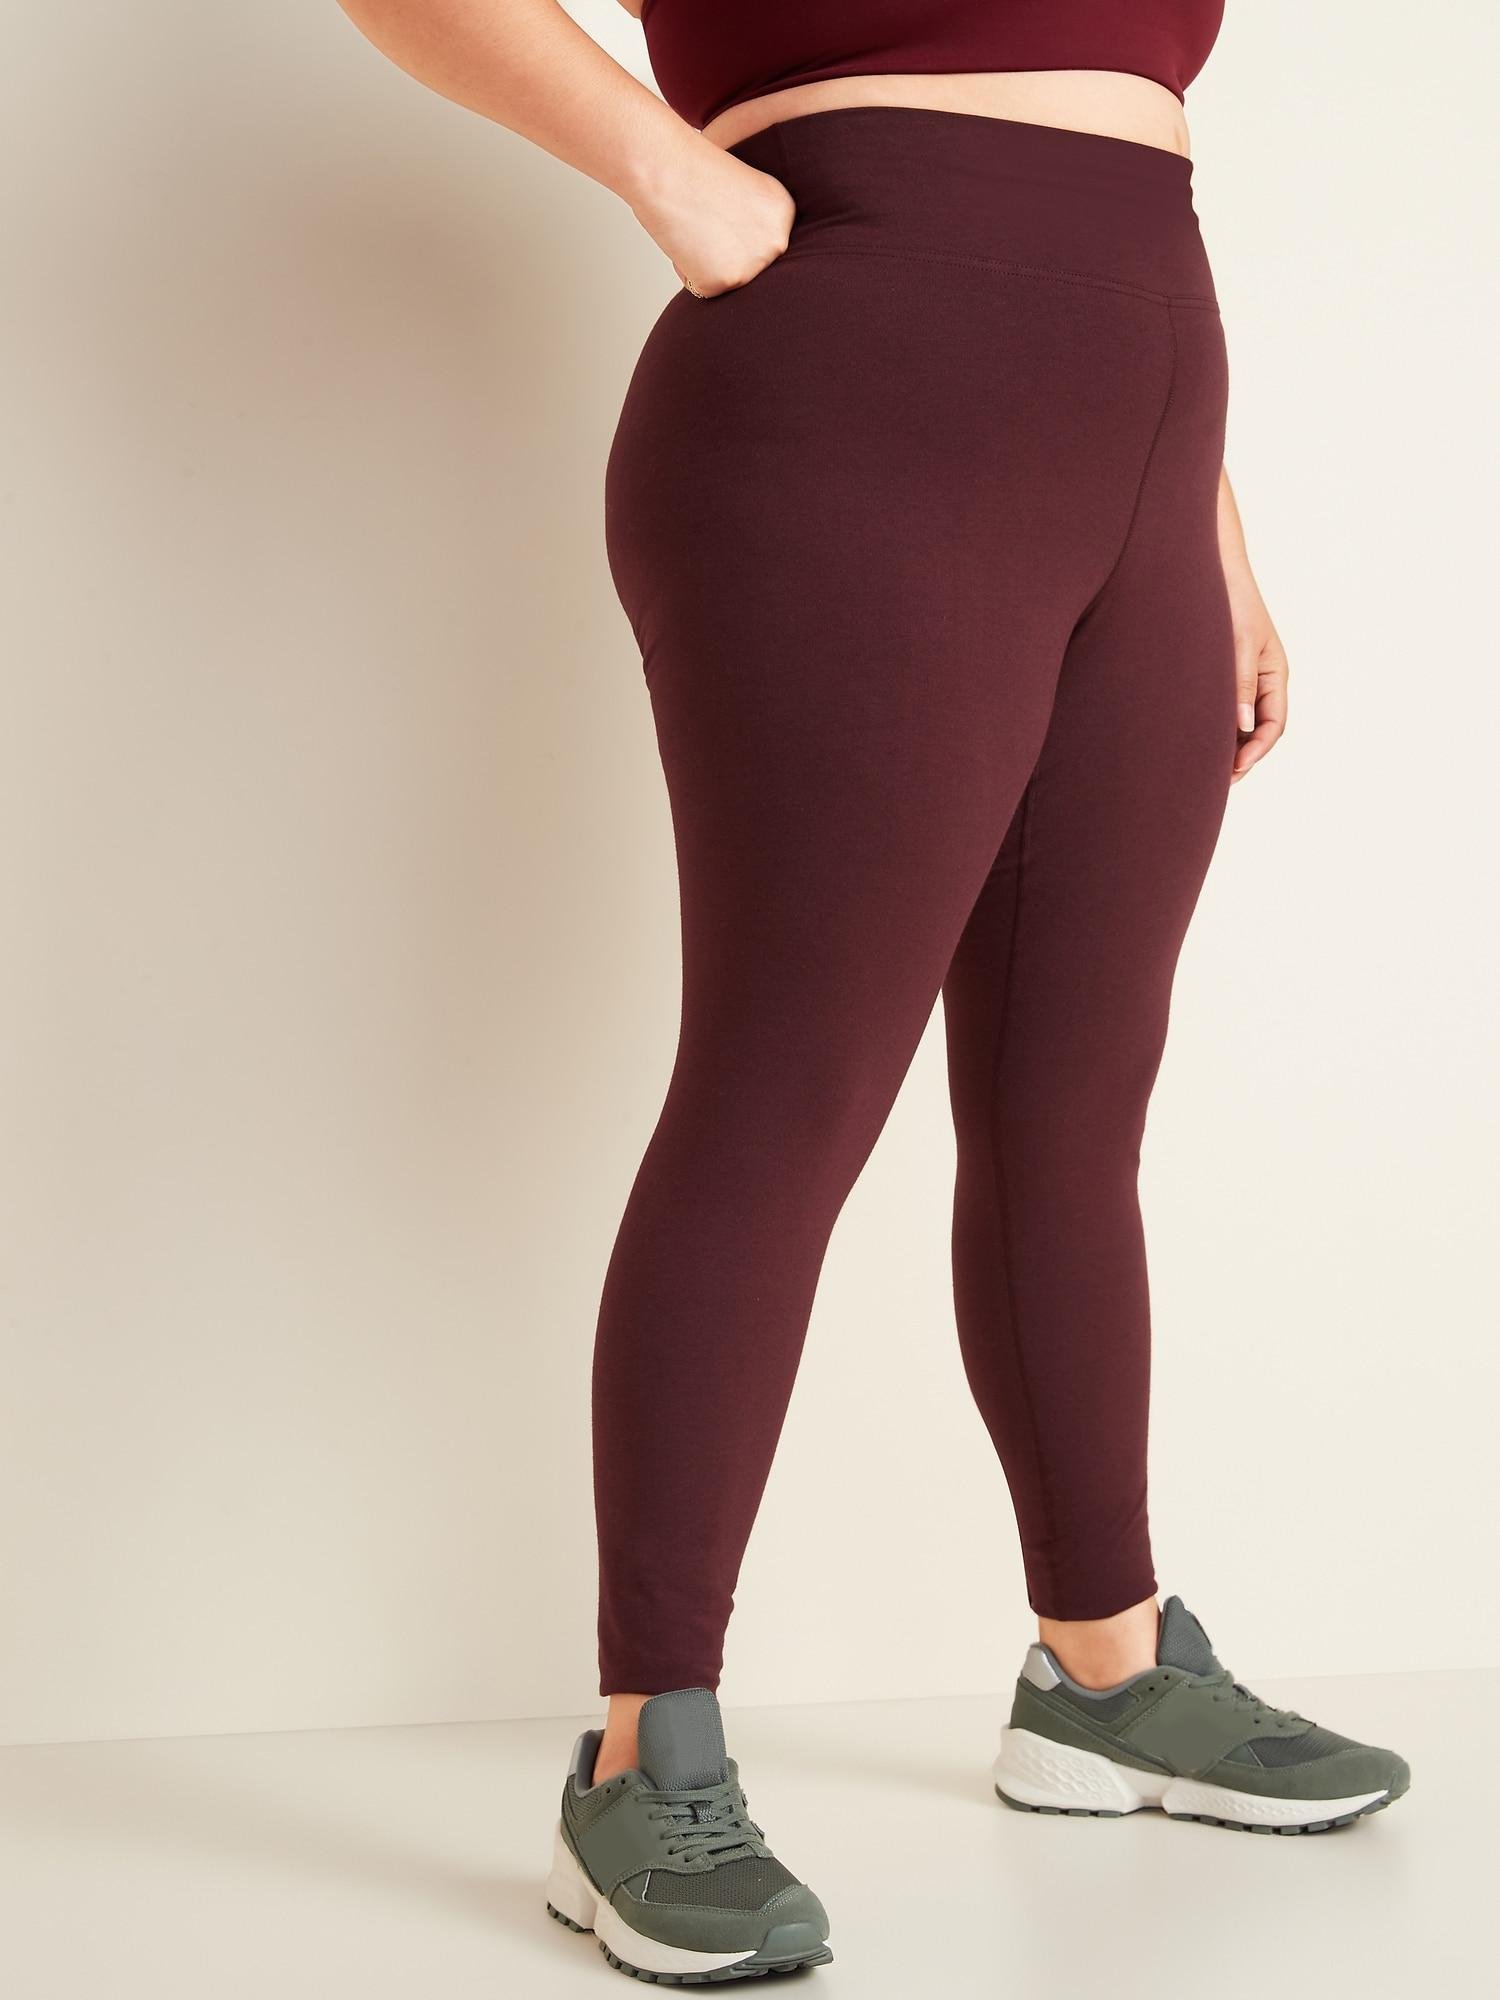 Old Navy Leggings Are Only $8 Today!